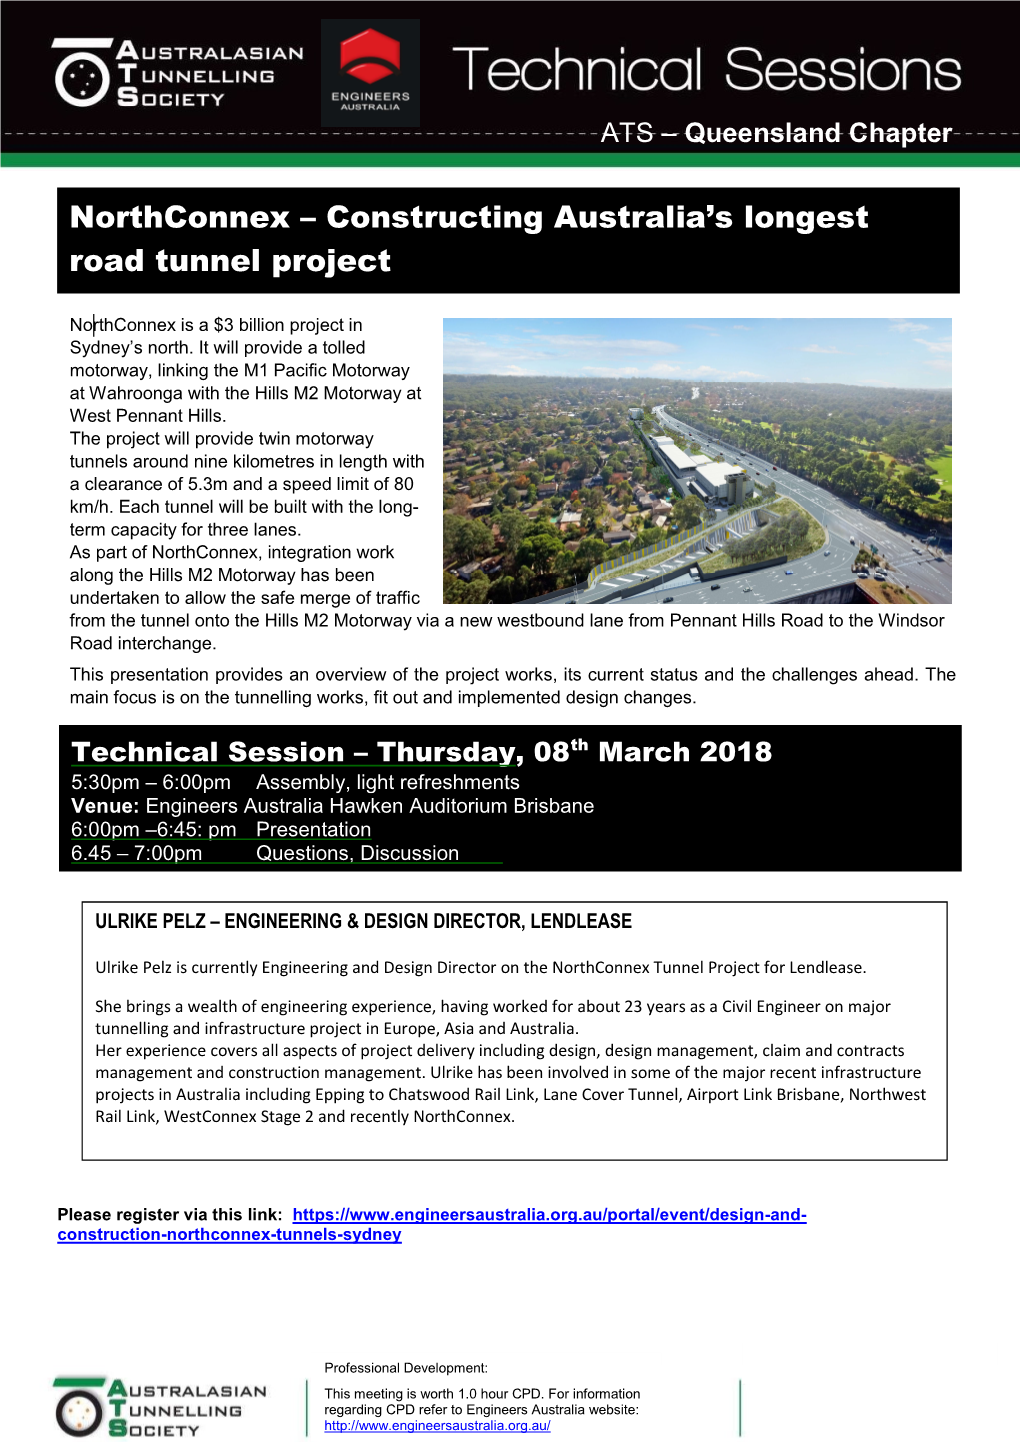 Northconnex – Constructing Australia's Longest Road Tunnel Project